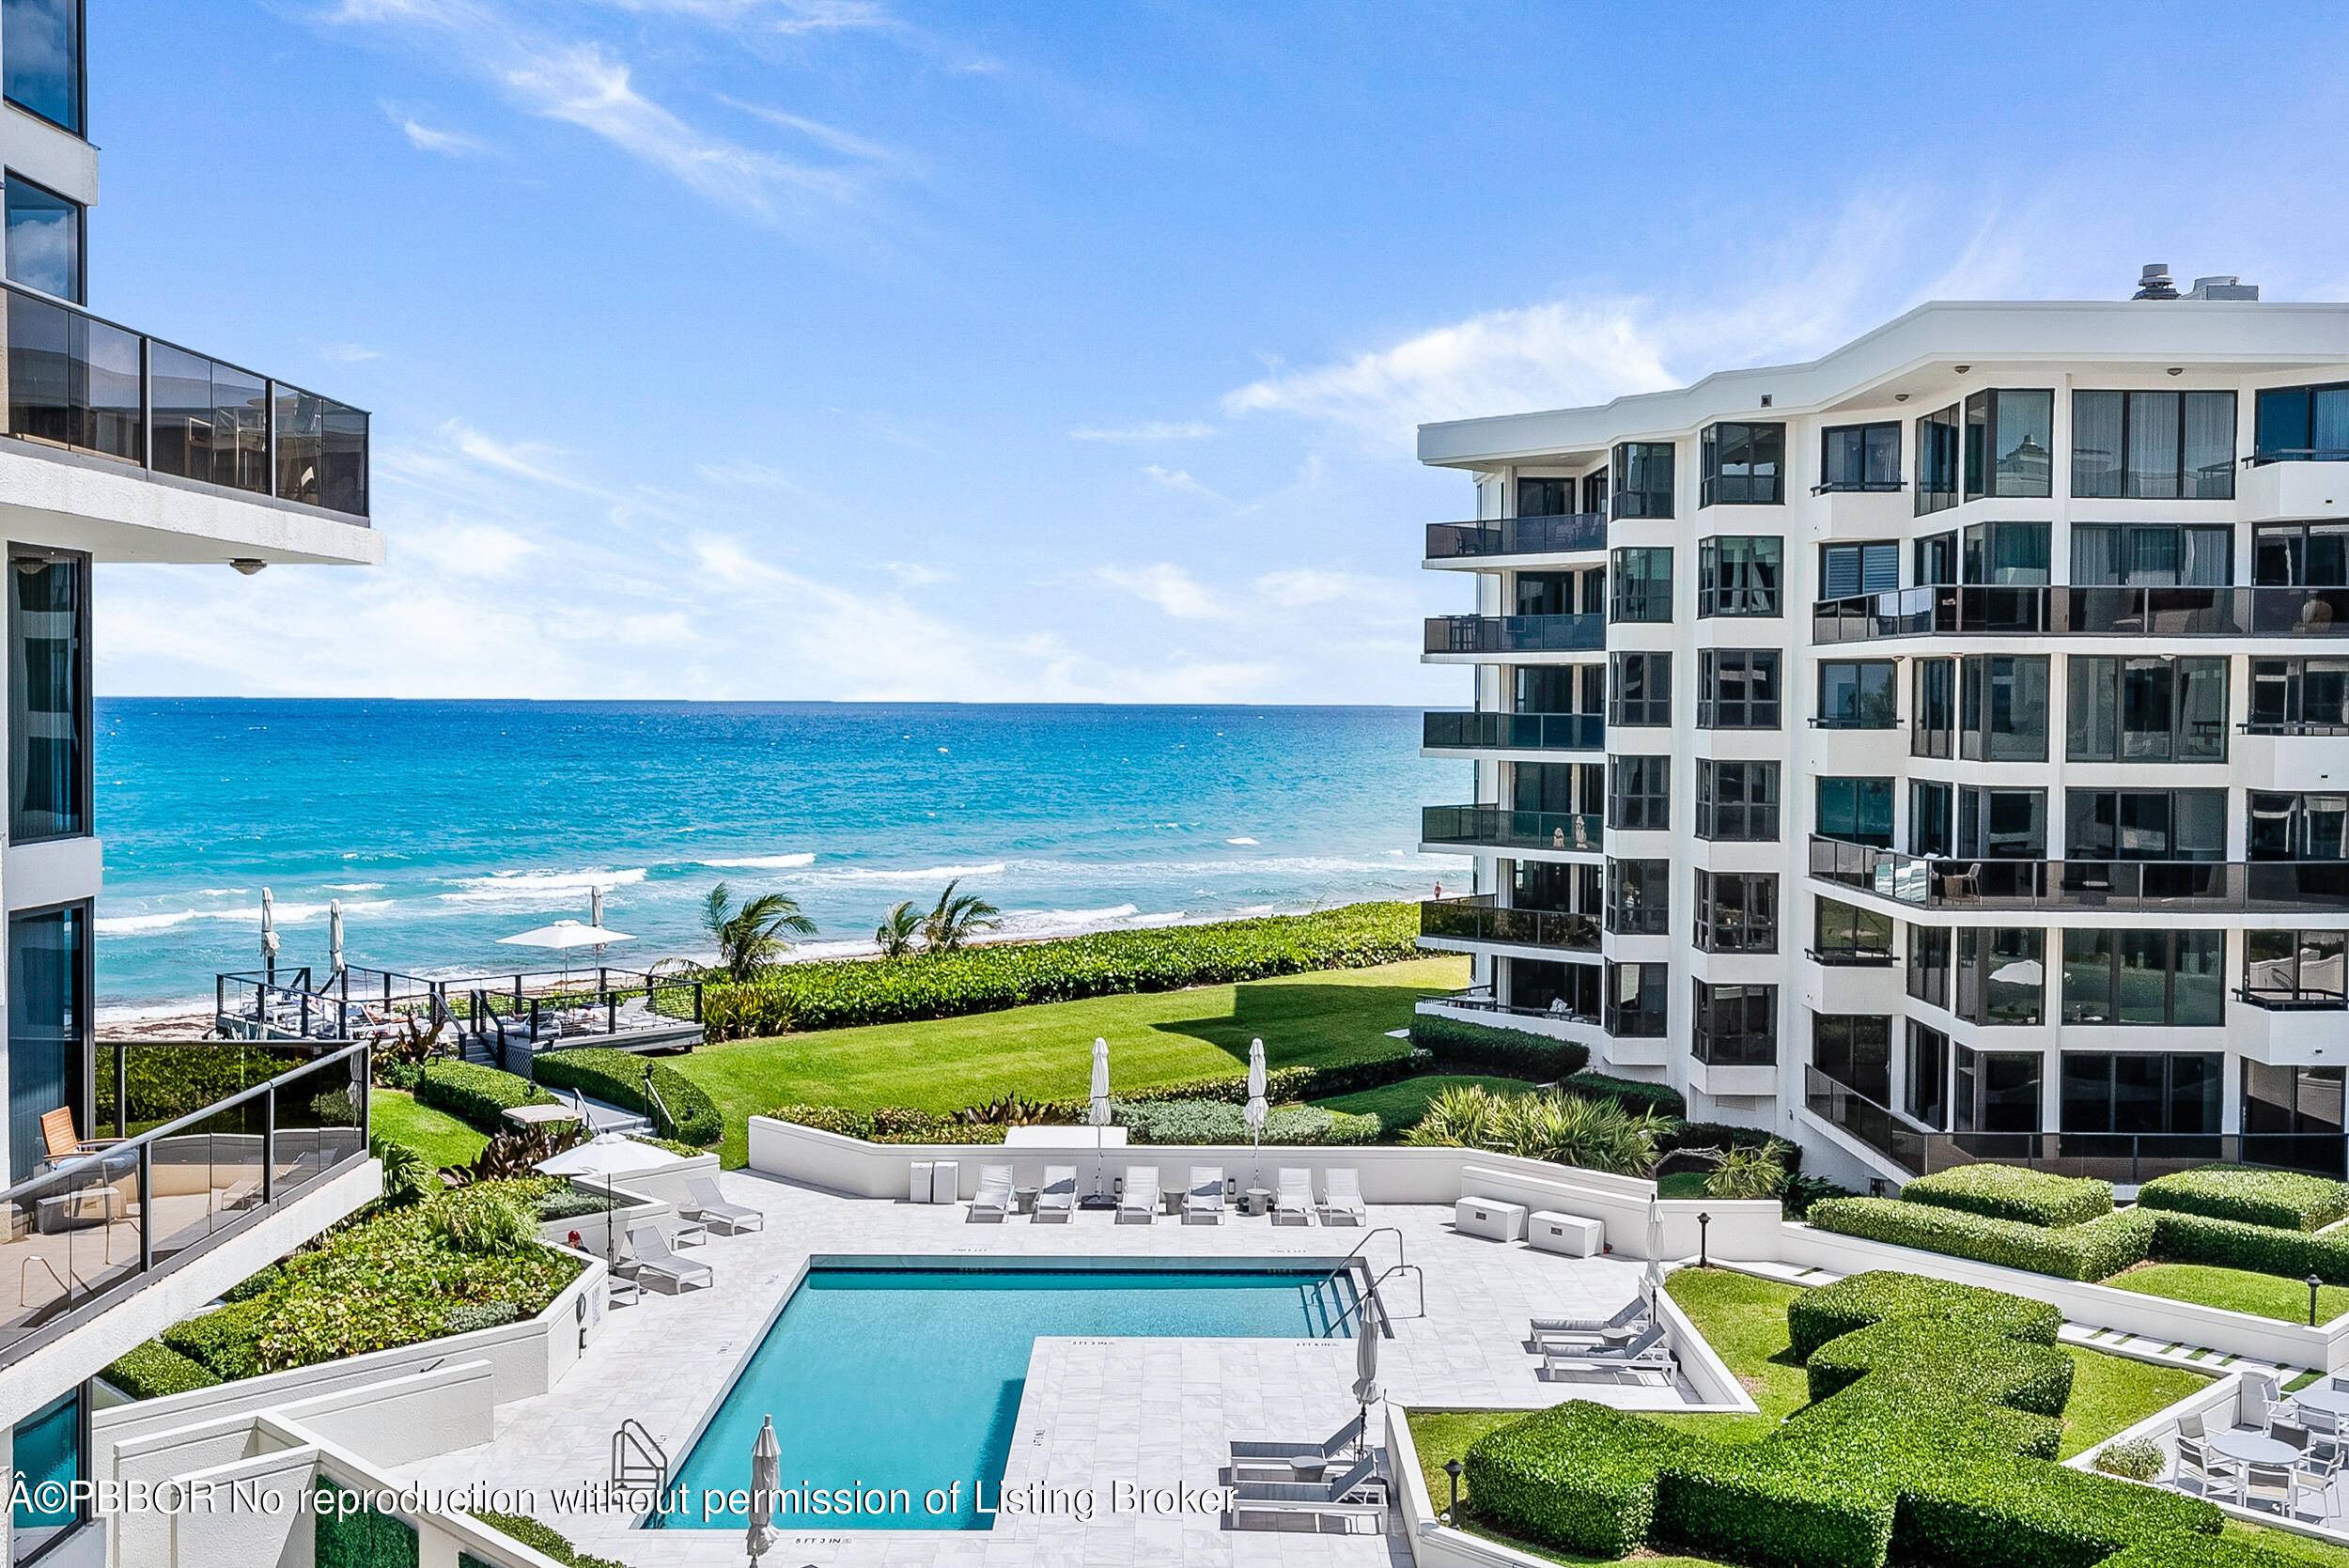 Designer oceanfront condo located on a wide sandy beach in South Palm Beach.